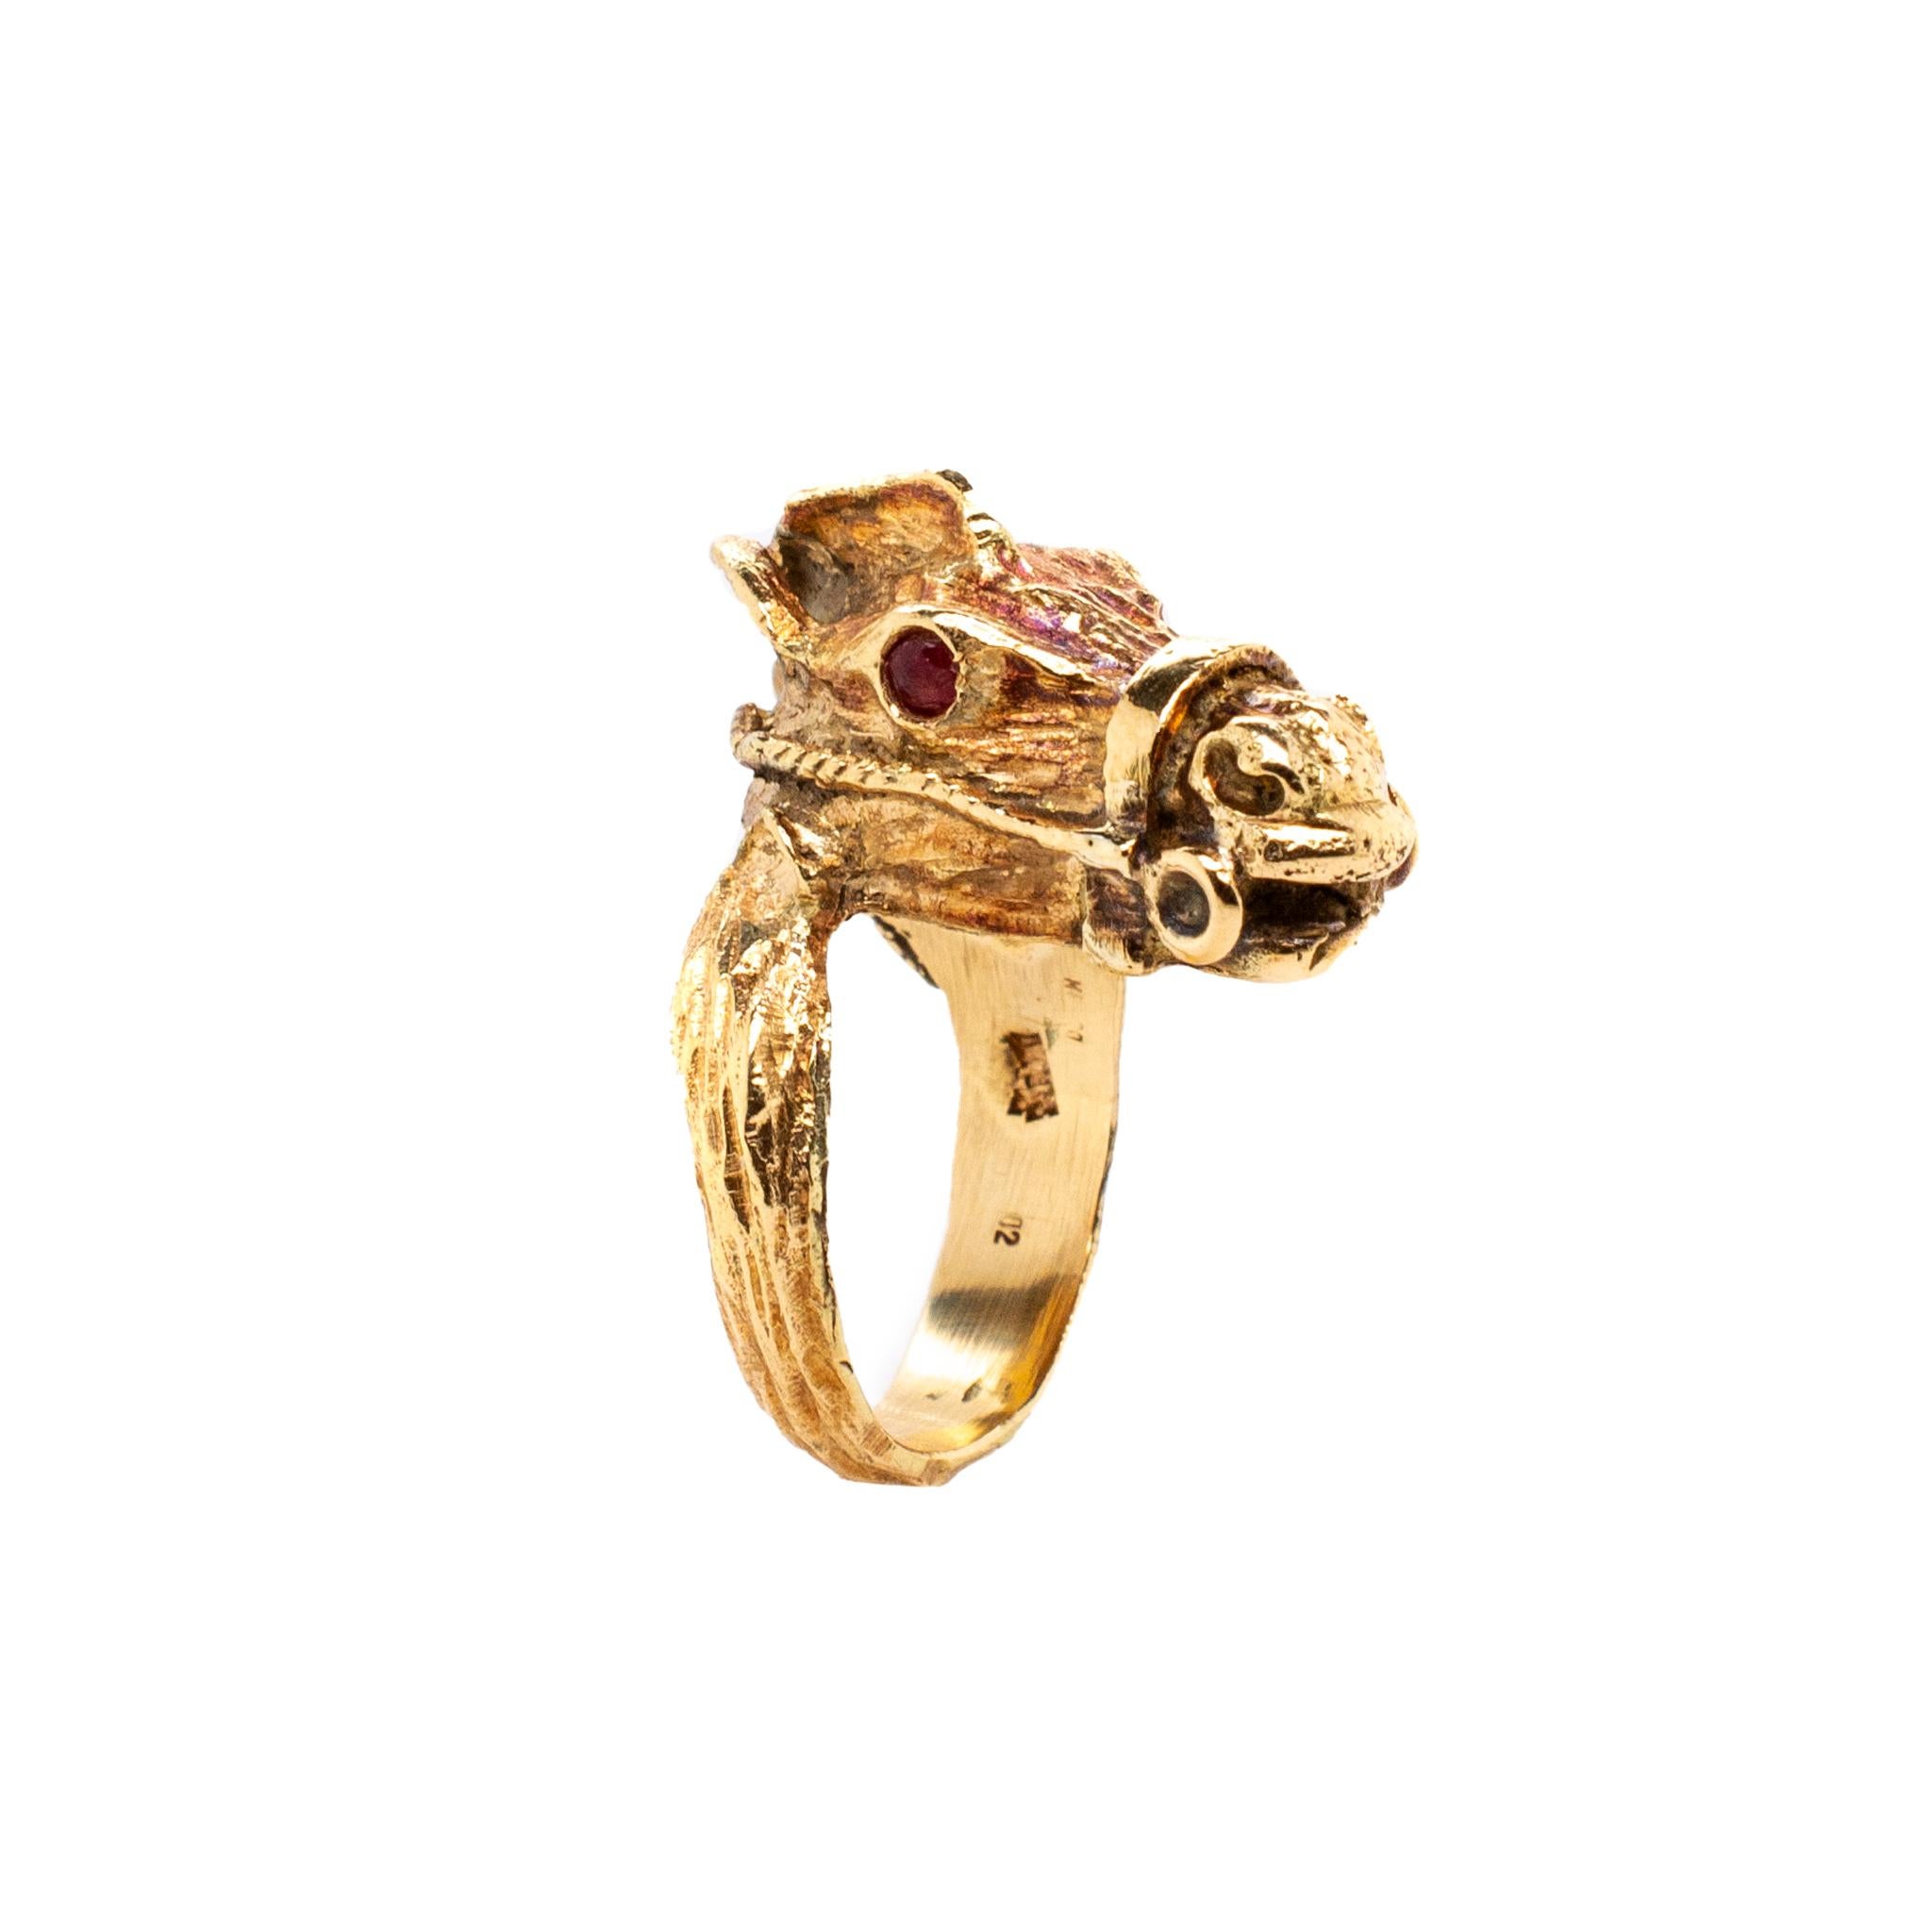 One hand made textured & polished 14K yellow gold, ruby vintage ring with a slightly rounded shank. The ring is a size 6.75. The ring weighs a total of 11.80 grams. Engraved with 